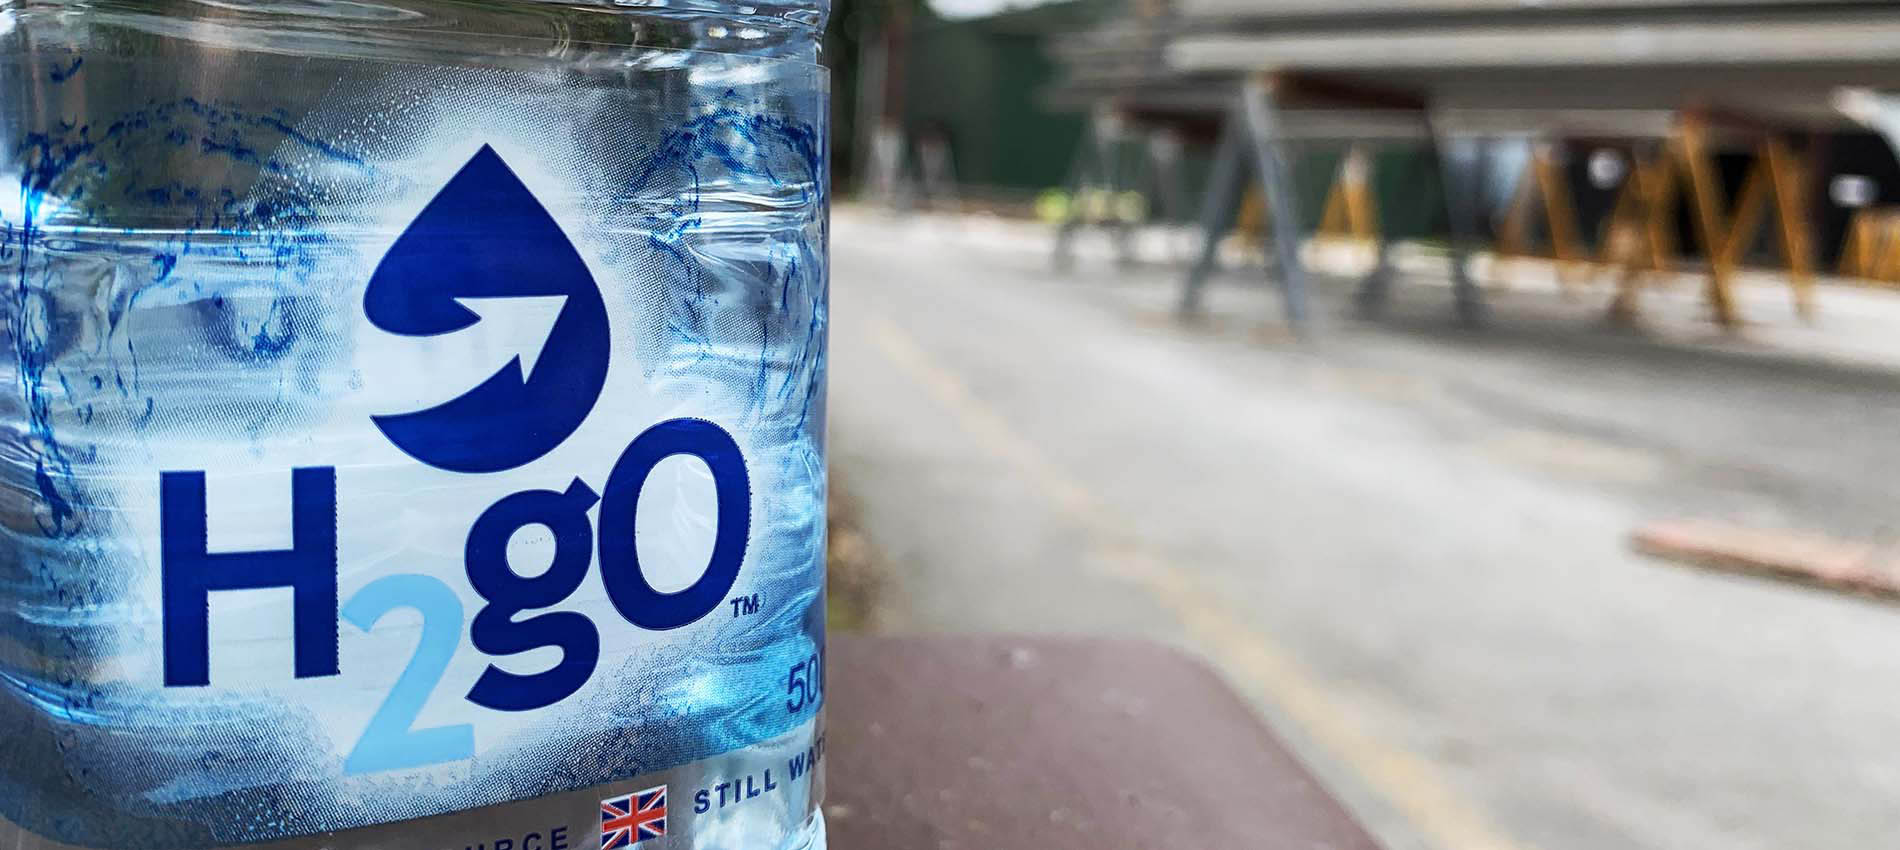 Bottled water with "h2go" brand - an alternative supply for water interruptions